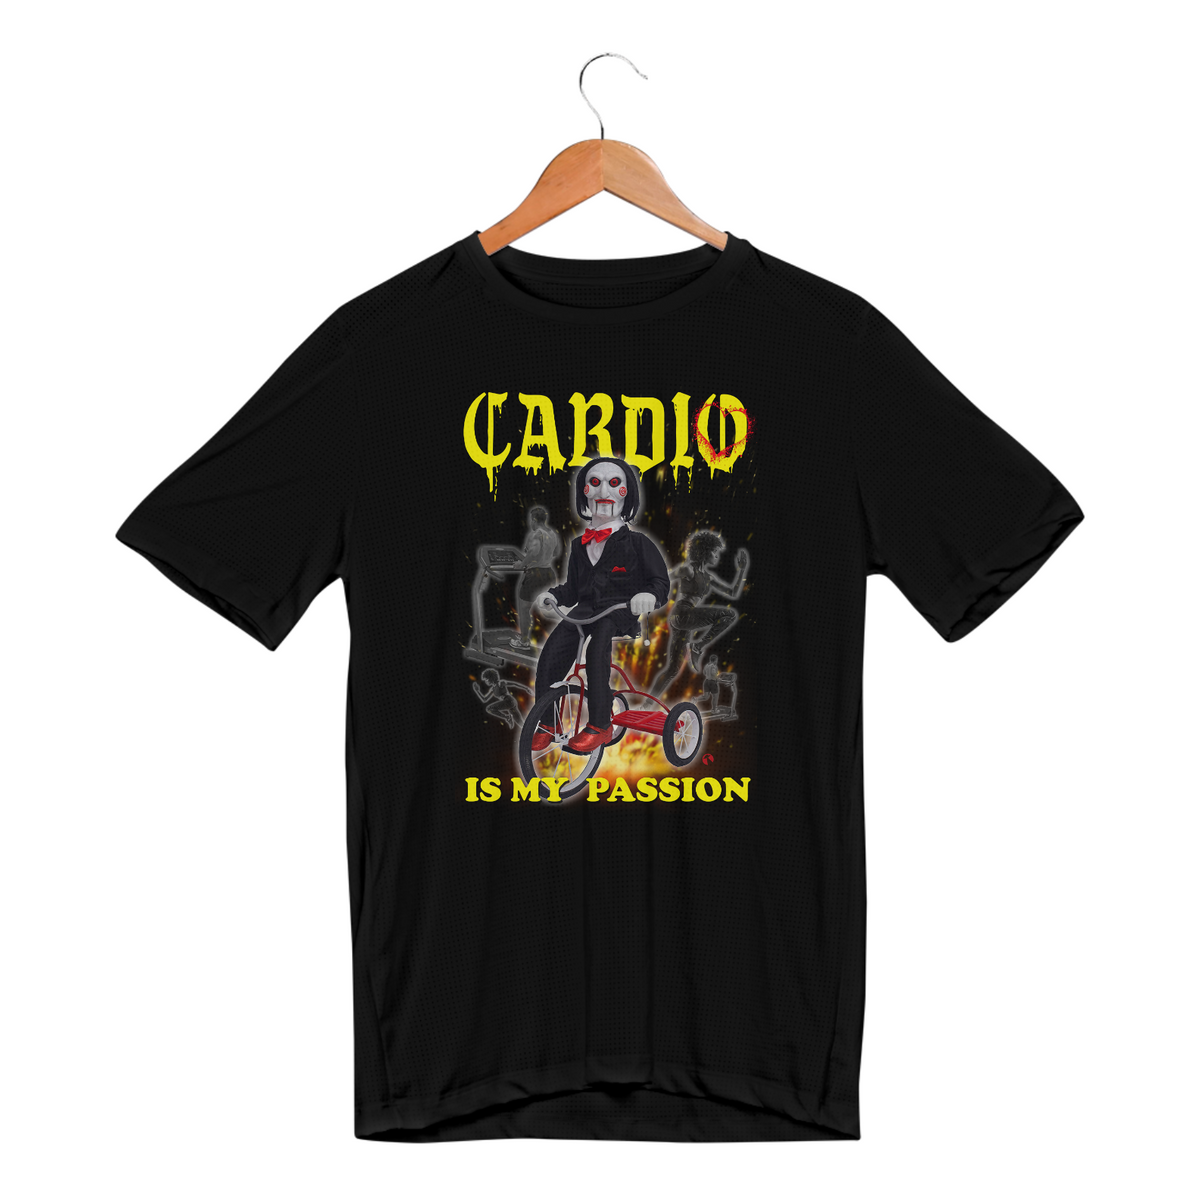 Nome do produto: Dry Fit - Cardio is my Passion (Jigsaw)